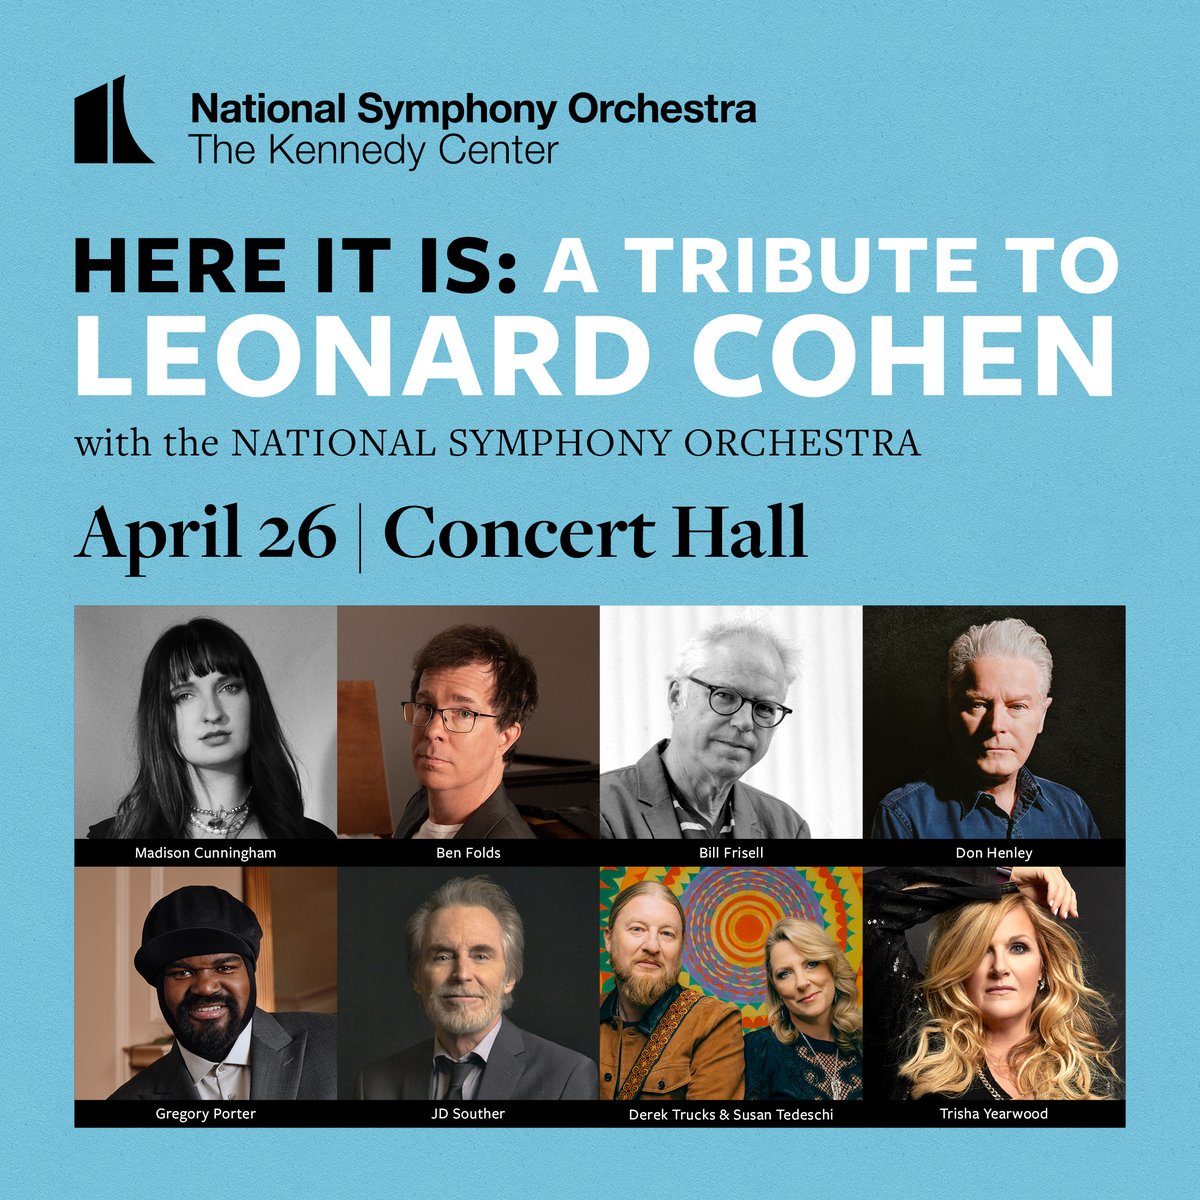 DC! Catch me April 26th at @kencen with some other incredible artists for a Leonard Cohen tribute show. General on sale is this Fri 12/22 at 10am ET. madisoncunningham.com/tour/